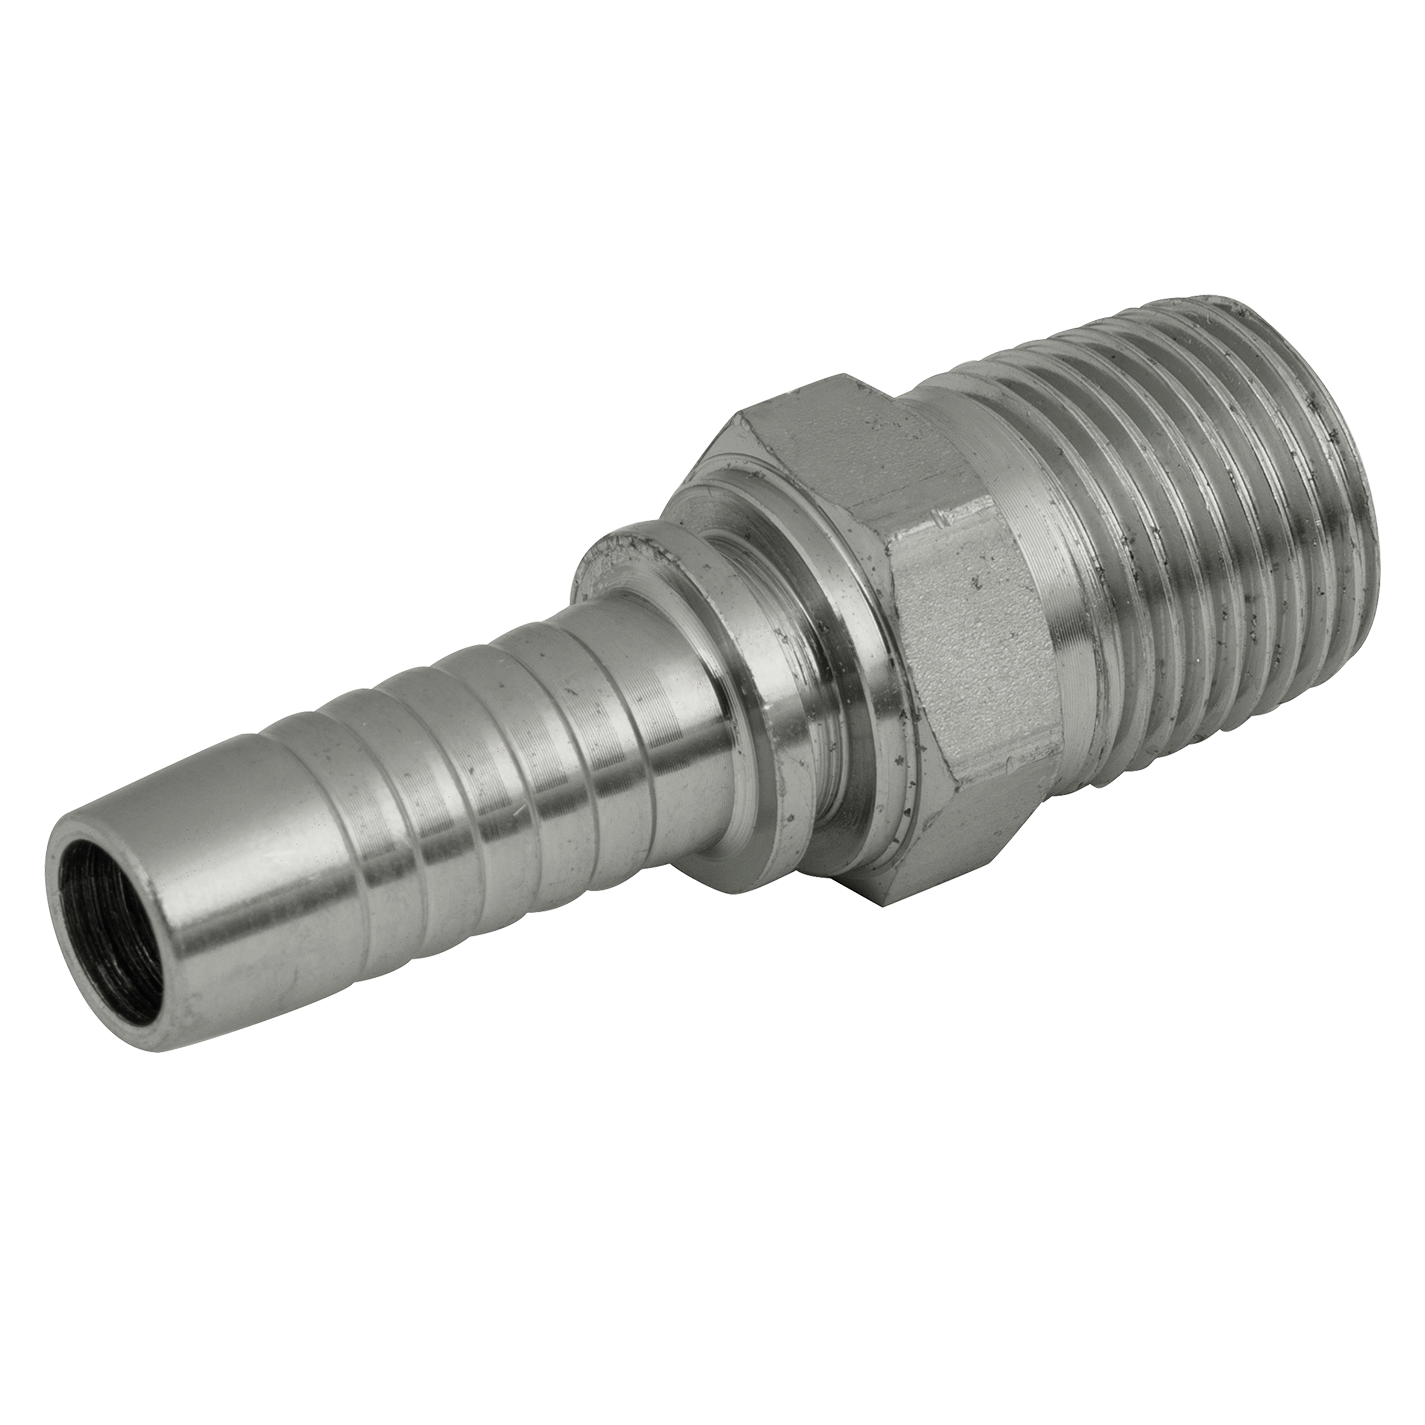 1/2" BSP X 1/2" MALE PUSH-IN STRAIGHT